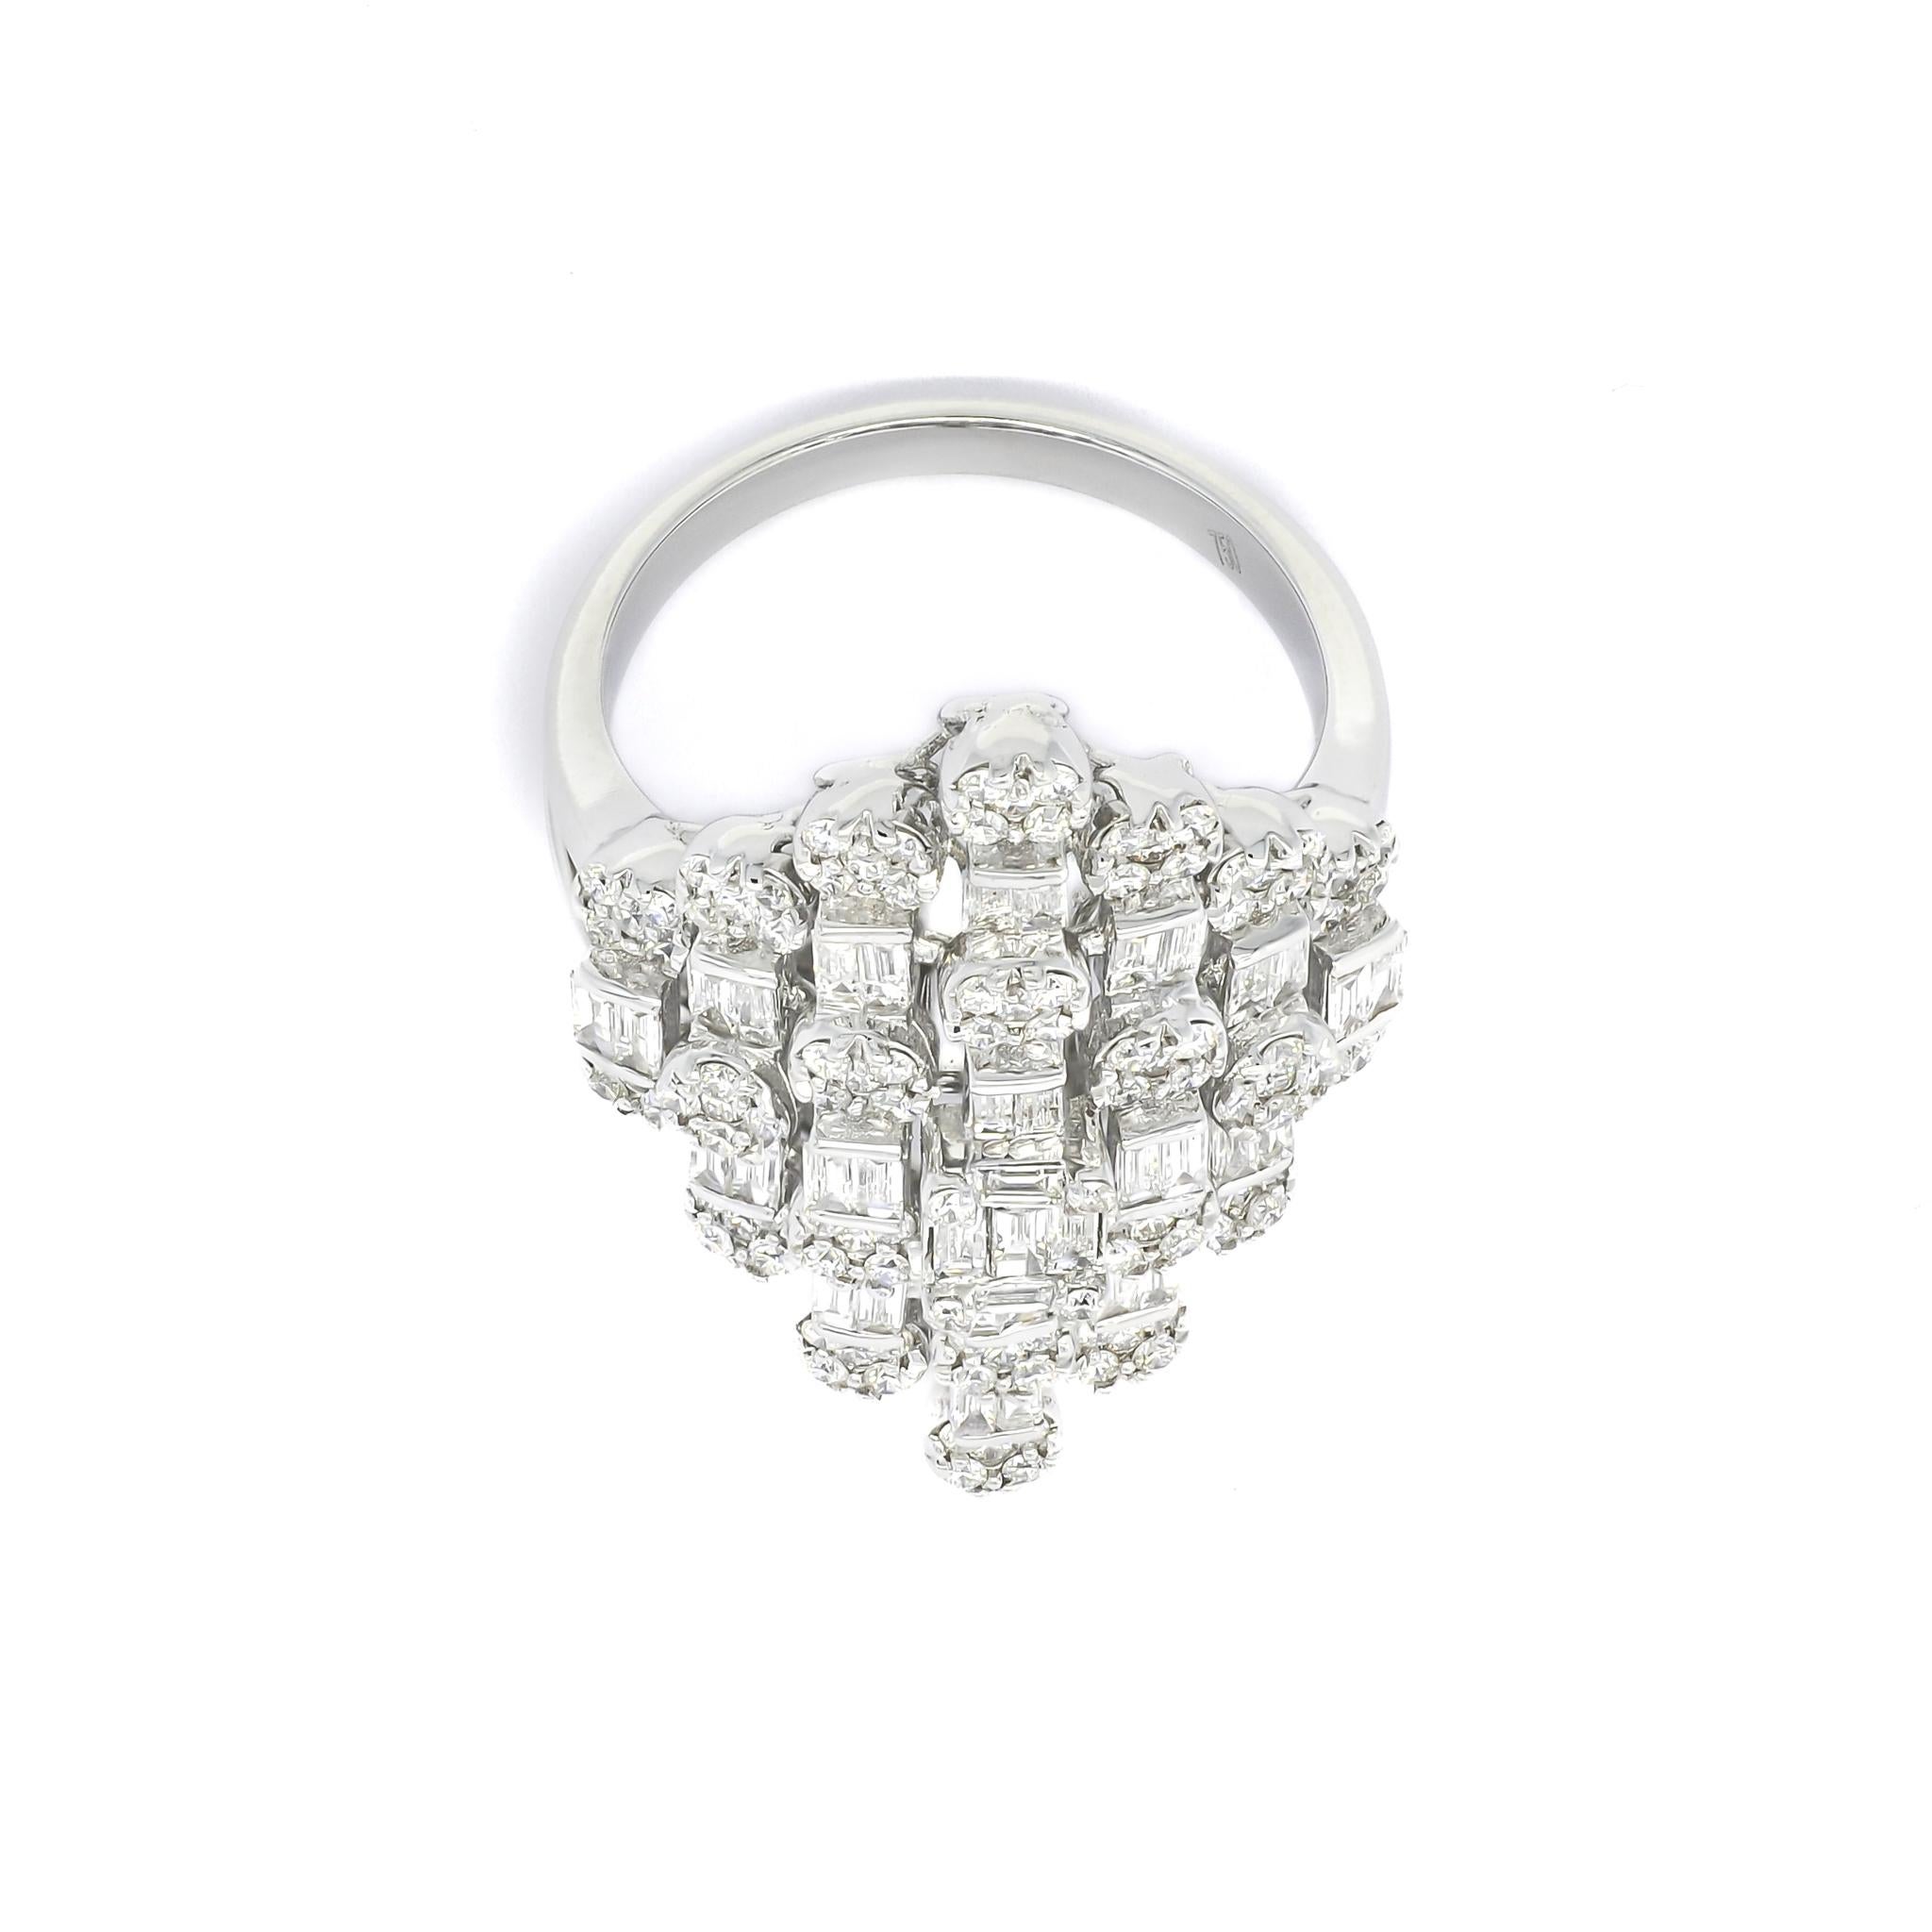 Immerse yourself in the captivating allure of this statement-making 18 KT White Gold ring, adorned with bold geometric vertical settings of baguette and round diamonds totaling 1.64 carats. The unique design of this ring features a striking